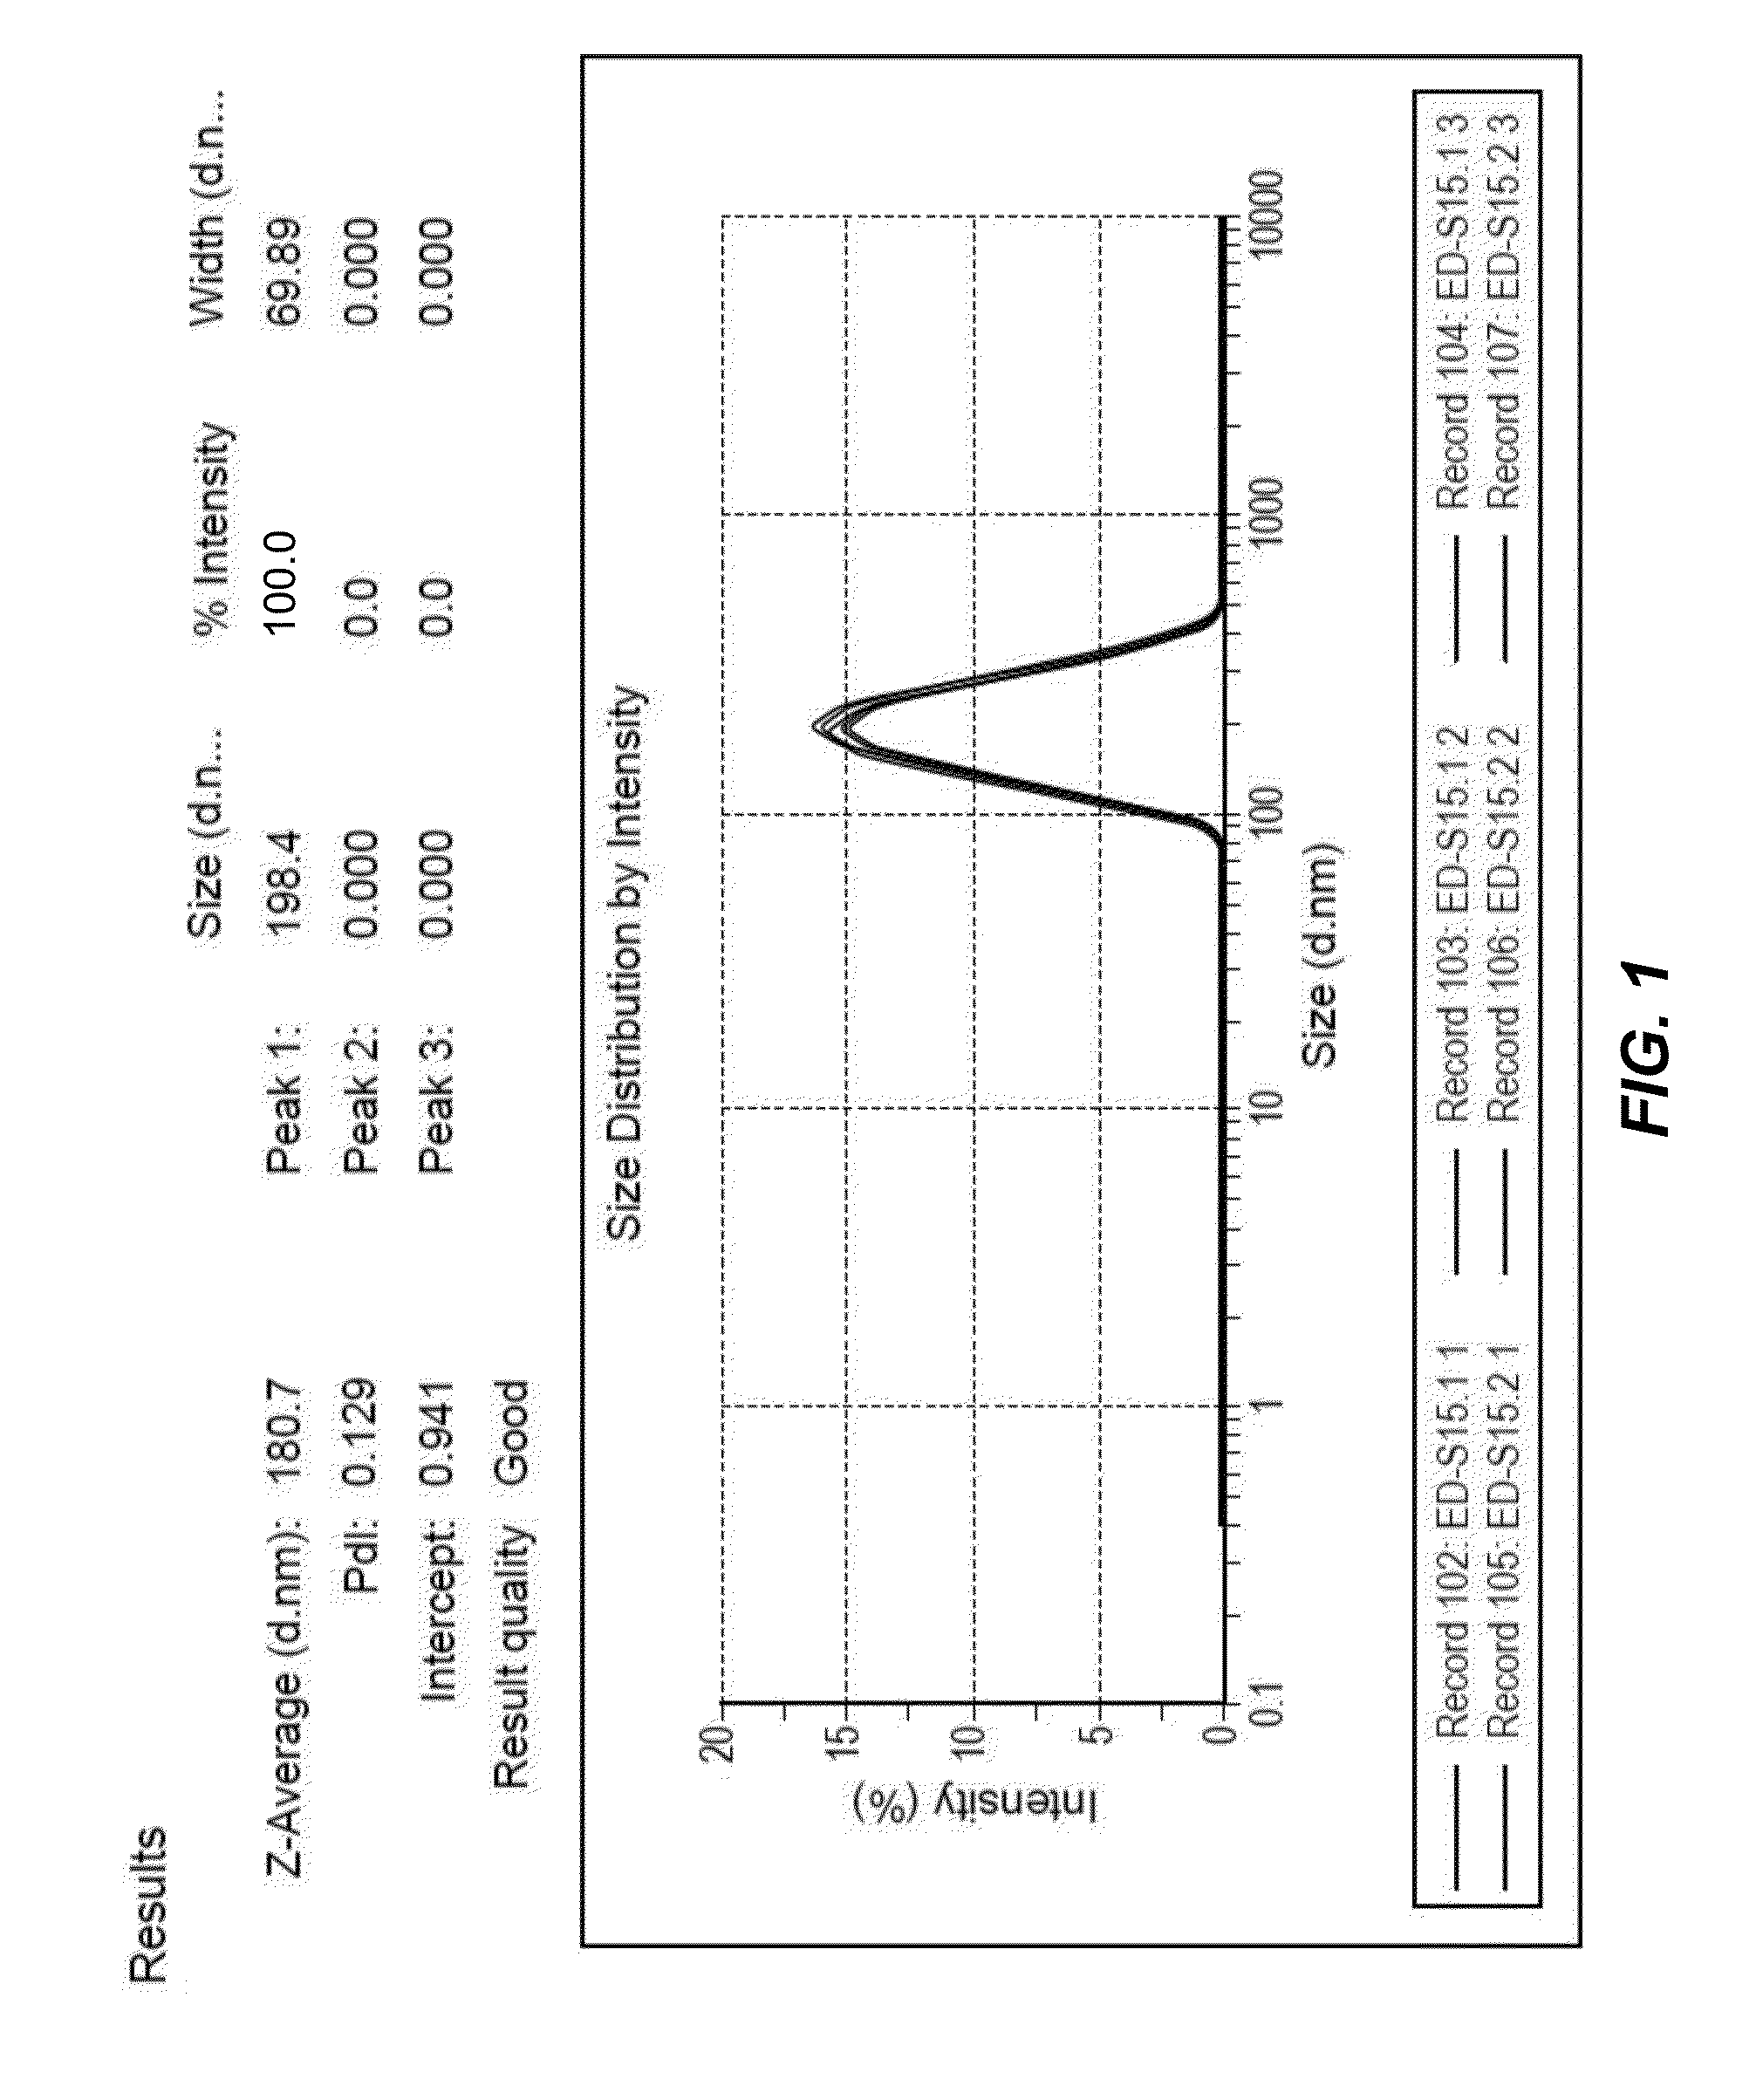 Contrast agent and its use for imaging